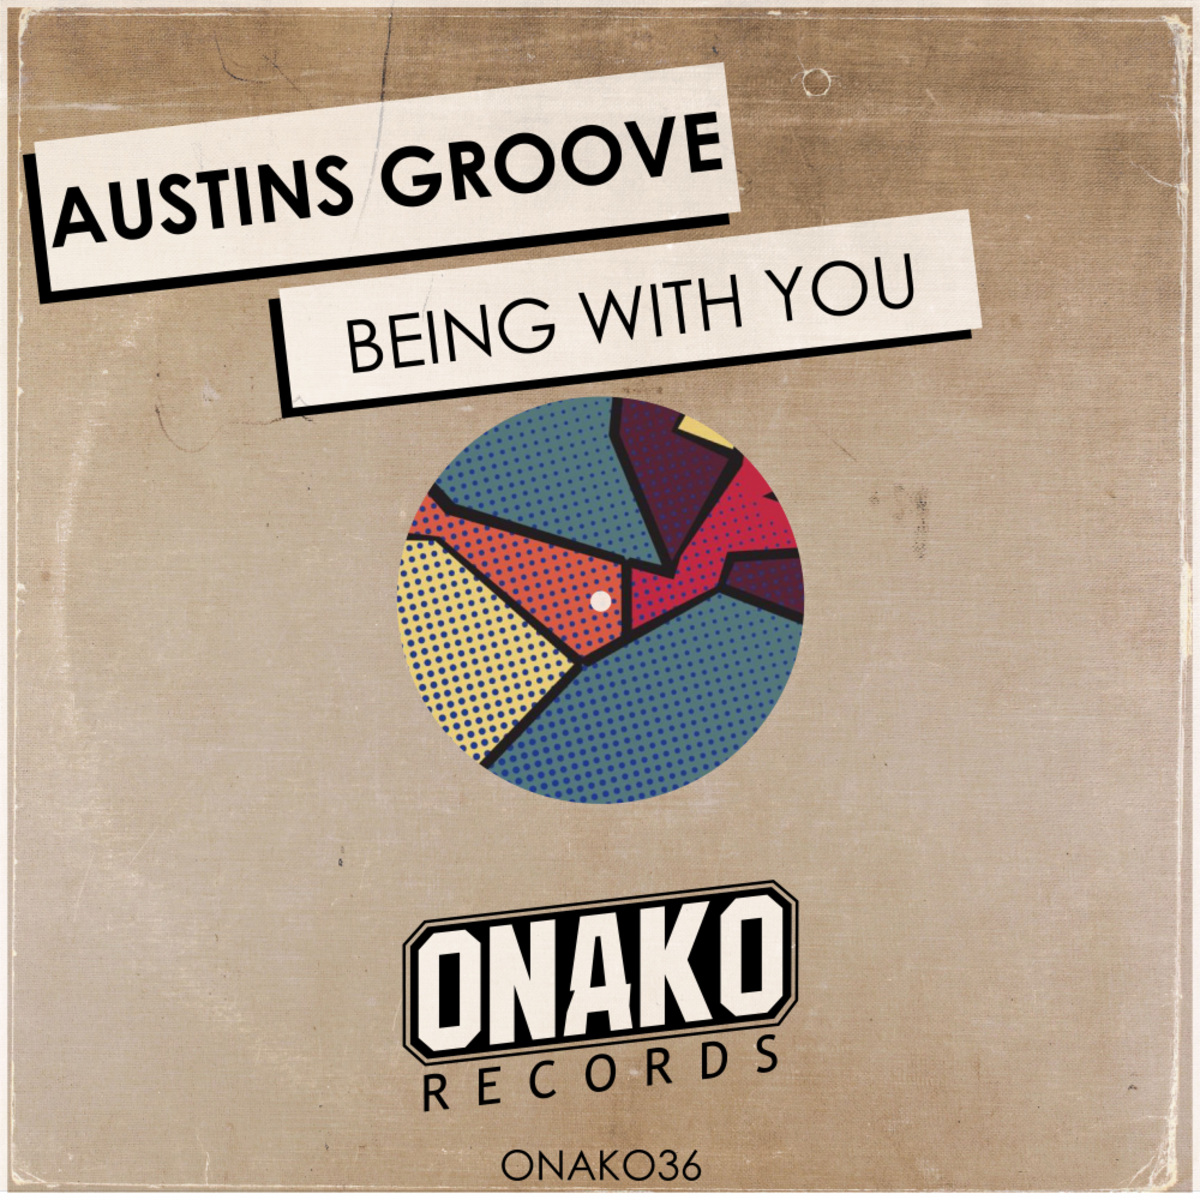 Austins Groove - Being With You / Onako Records